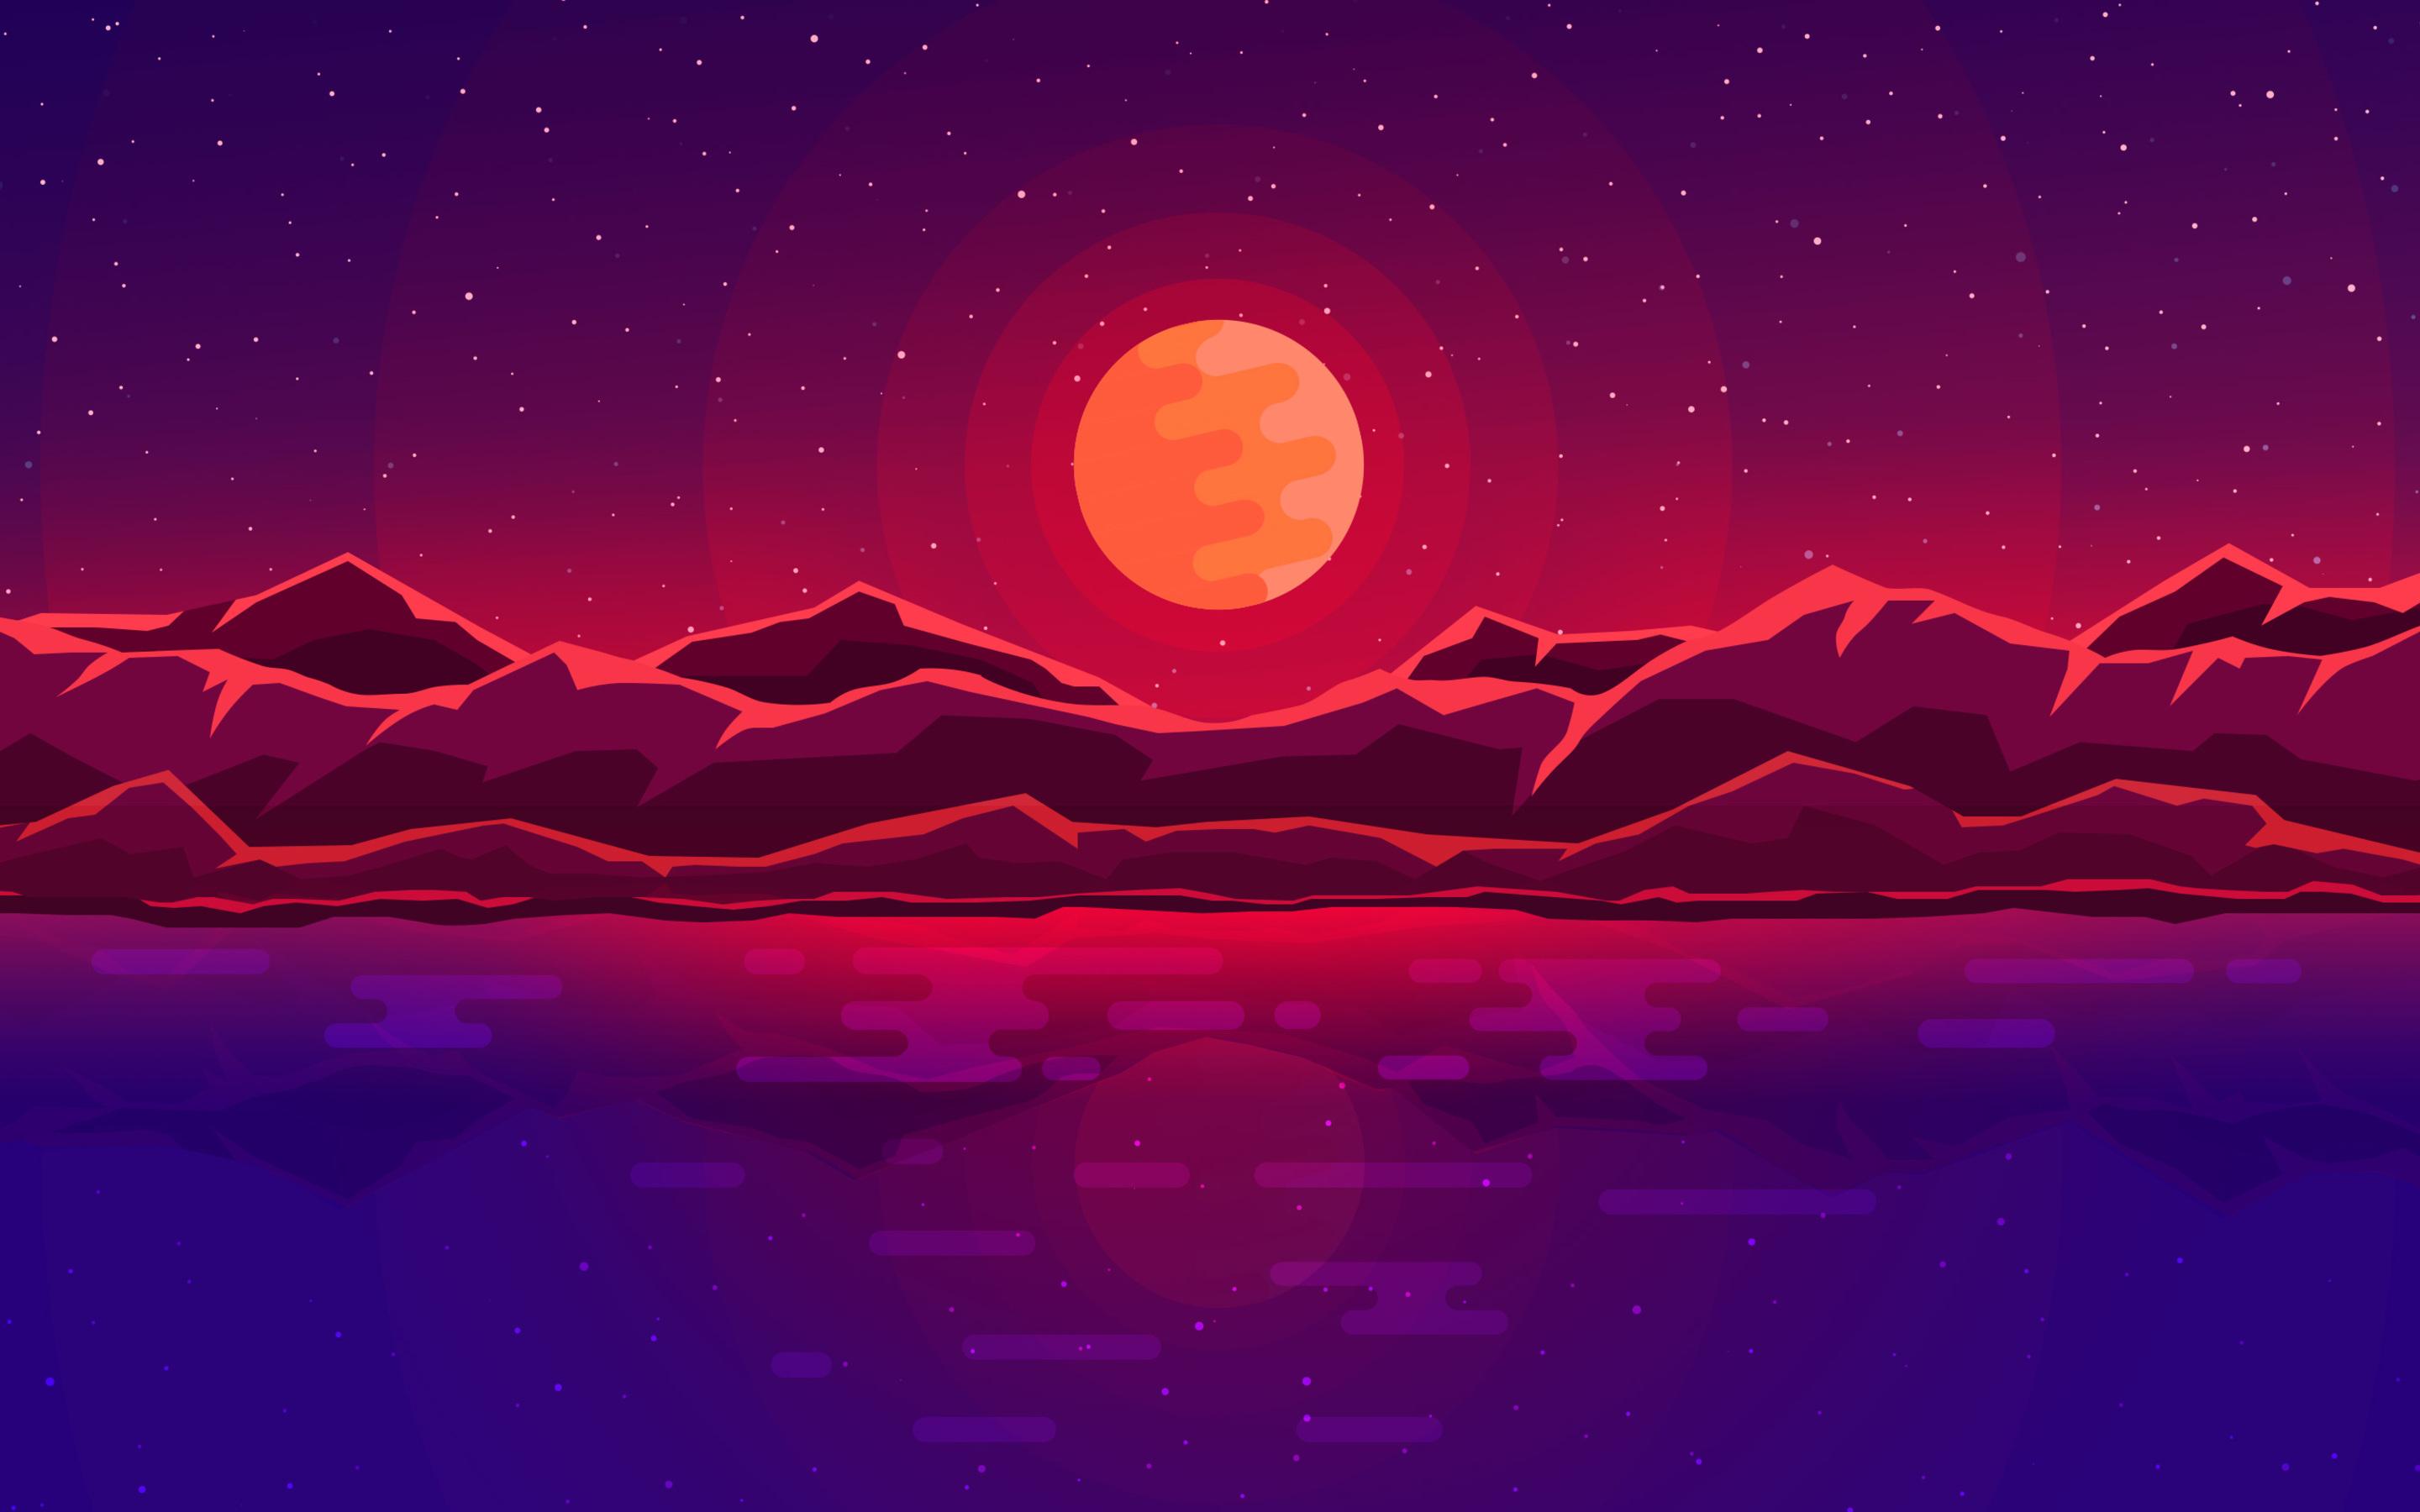 Download wallpaper abstract nightscape, moon, mountains, lake